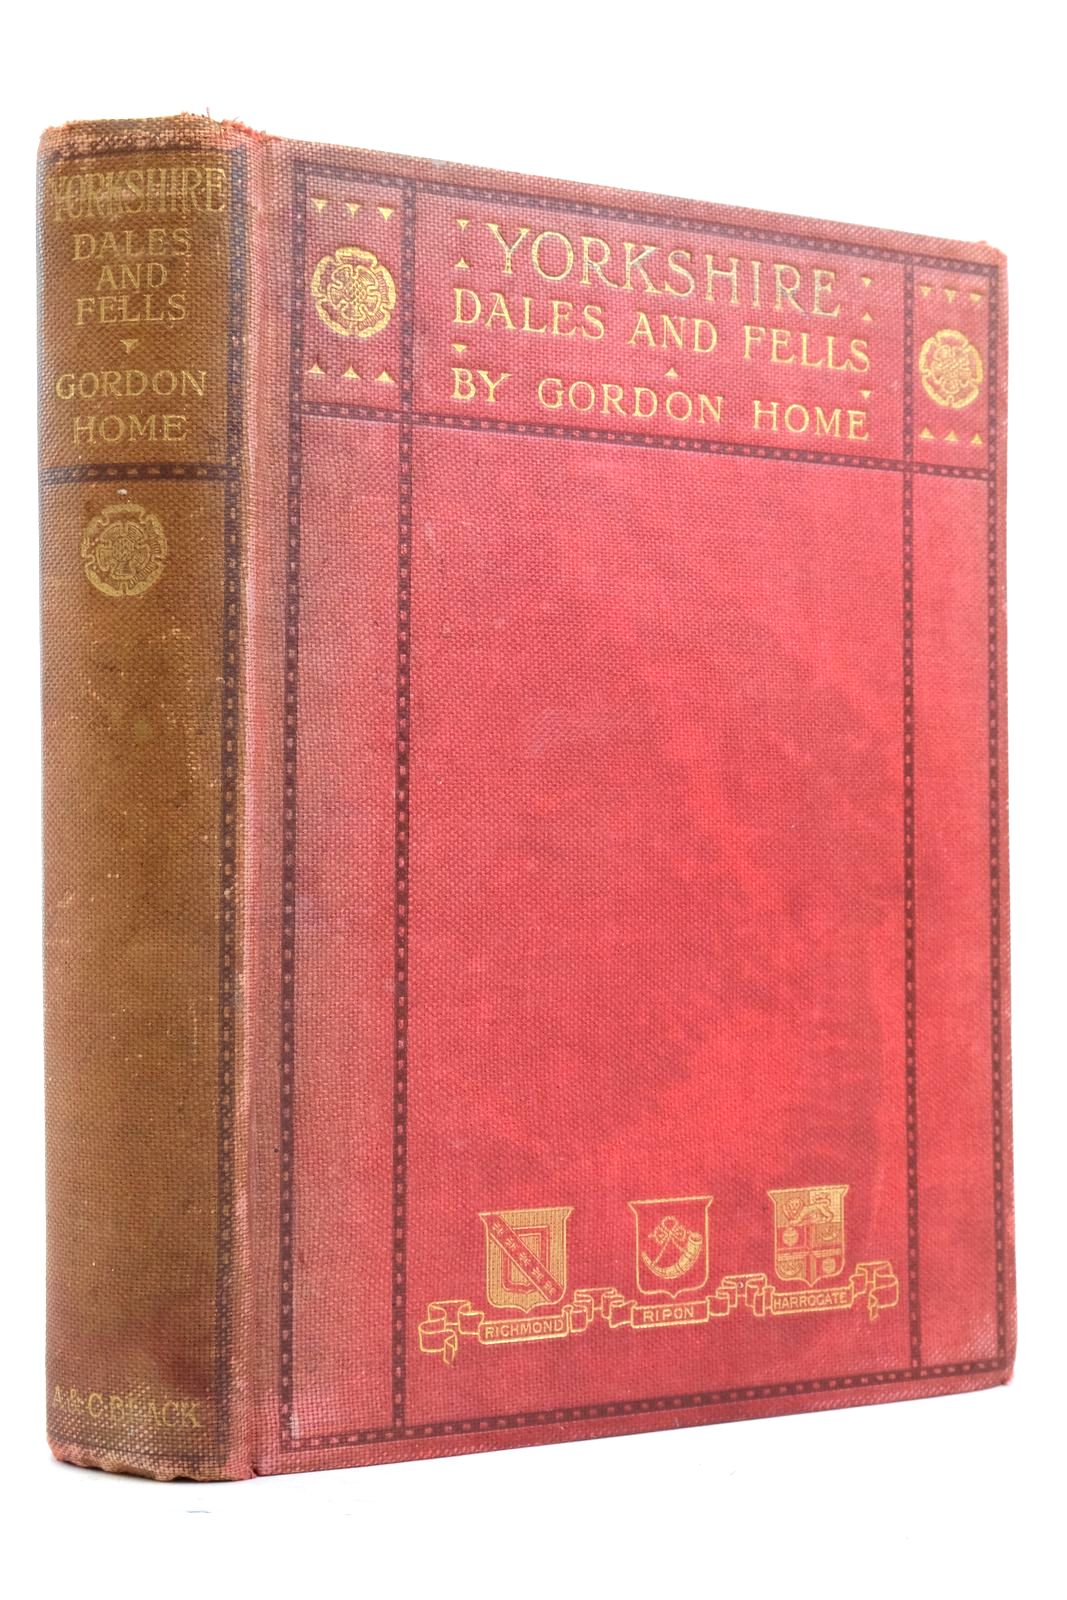 Photo of YORKSHIRE DALES AND FELLS written by Home, Gordon illustrated by Home, Gordon published by A. & C. Black (STOCK CODE: 2137120)  for sale by Stella & Rose's Books